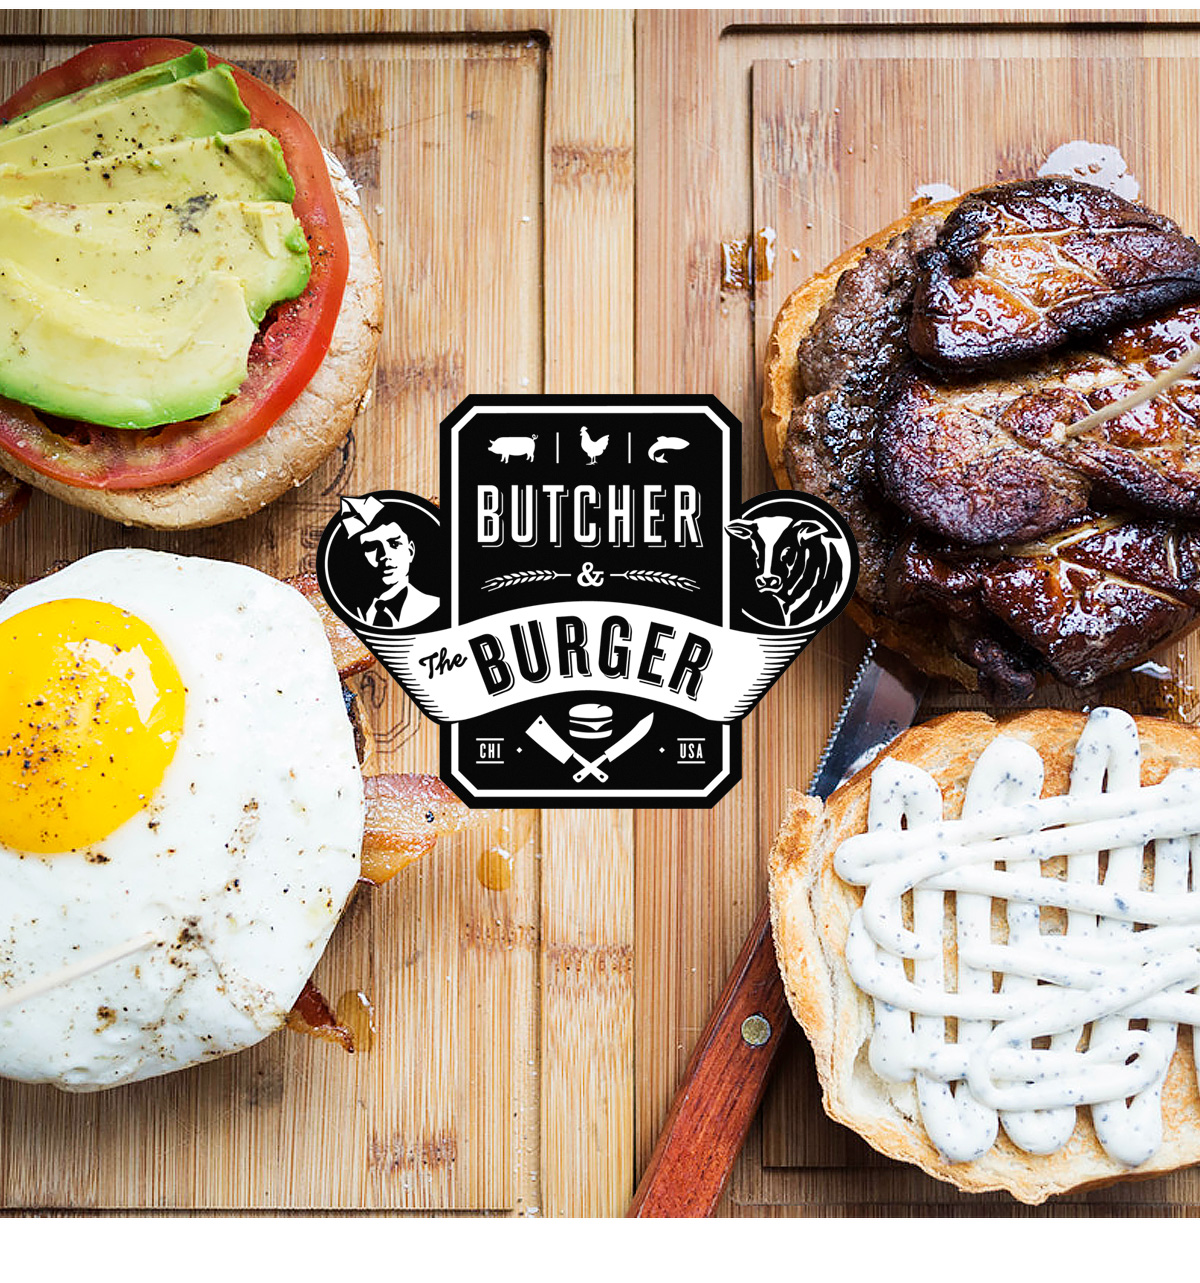 Butcher & The Burger / Chicago - Hospitality - Projects - Meat and Potatoes